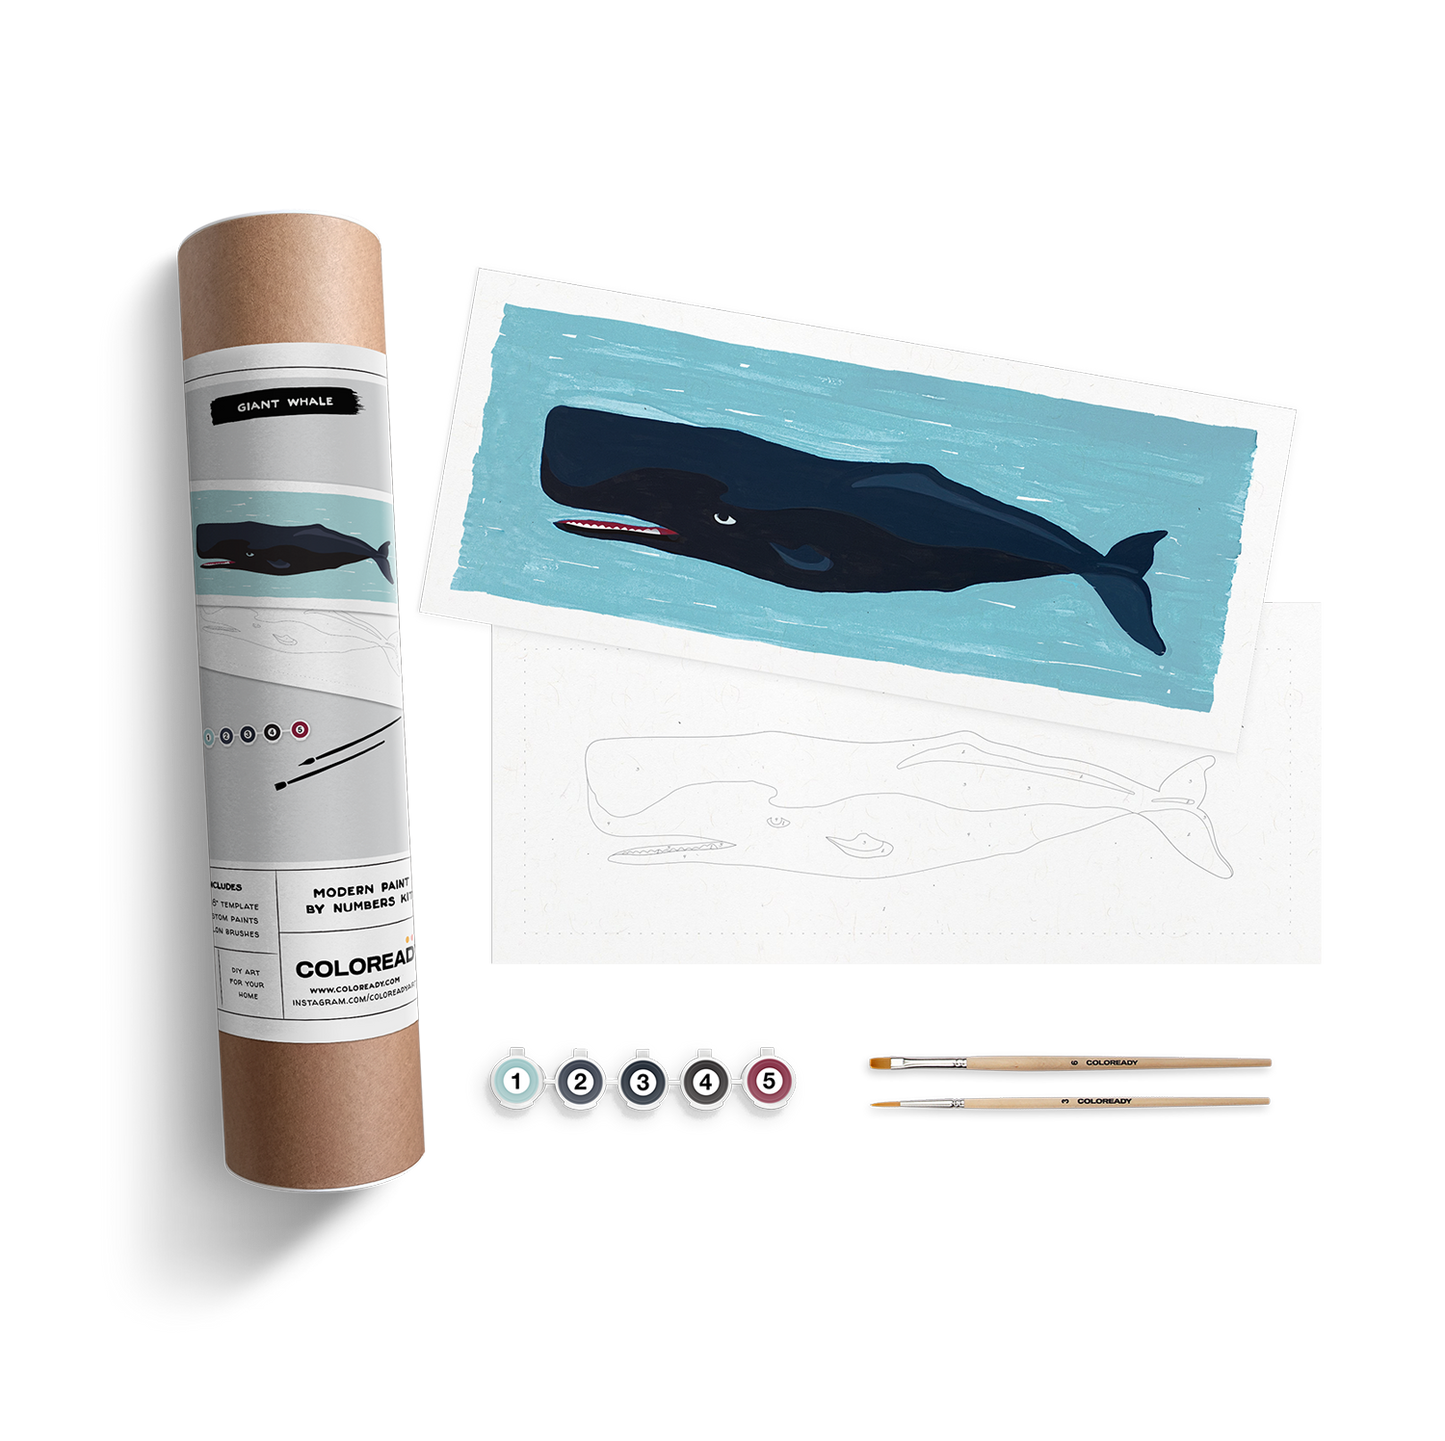 Giant Whale Painting Kit